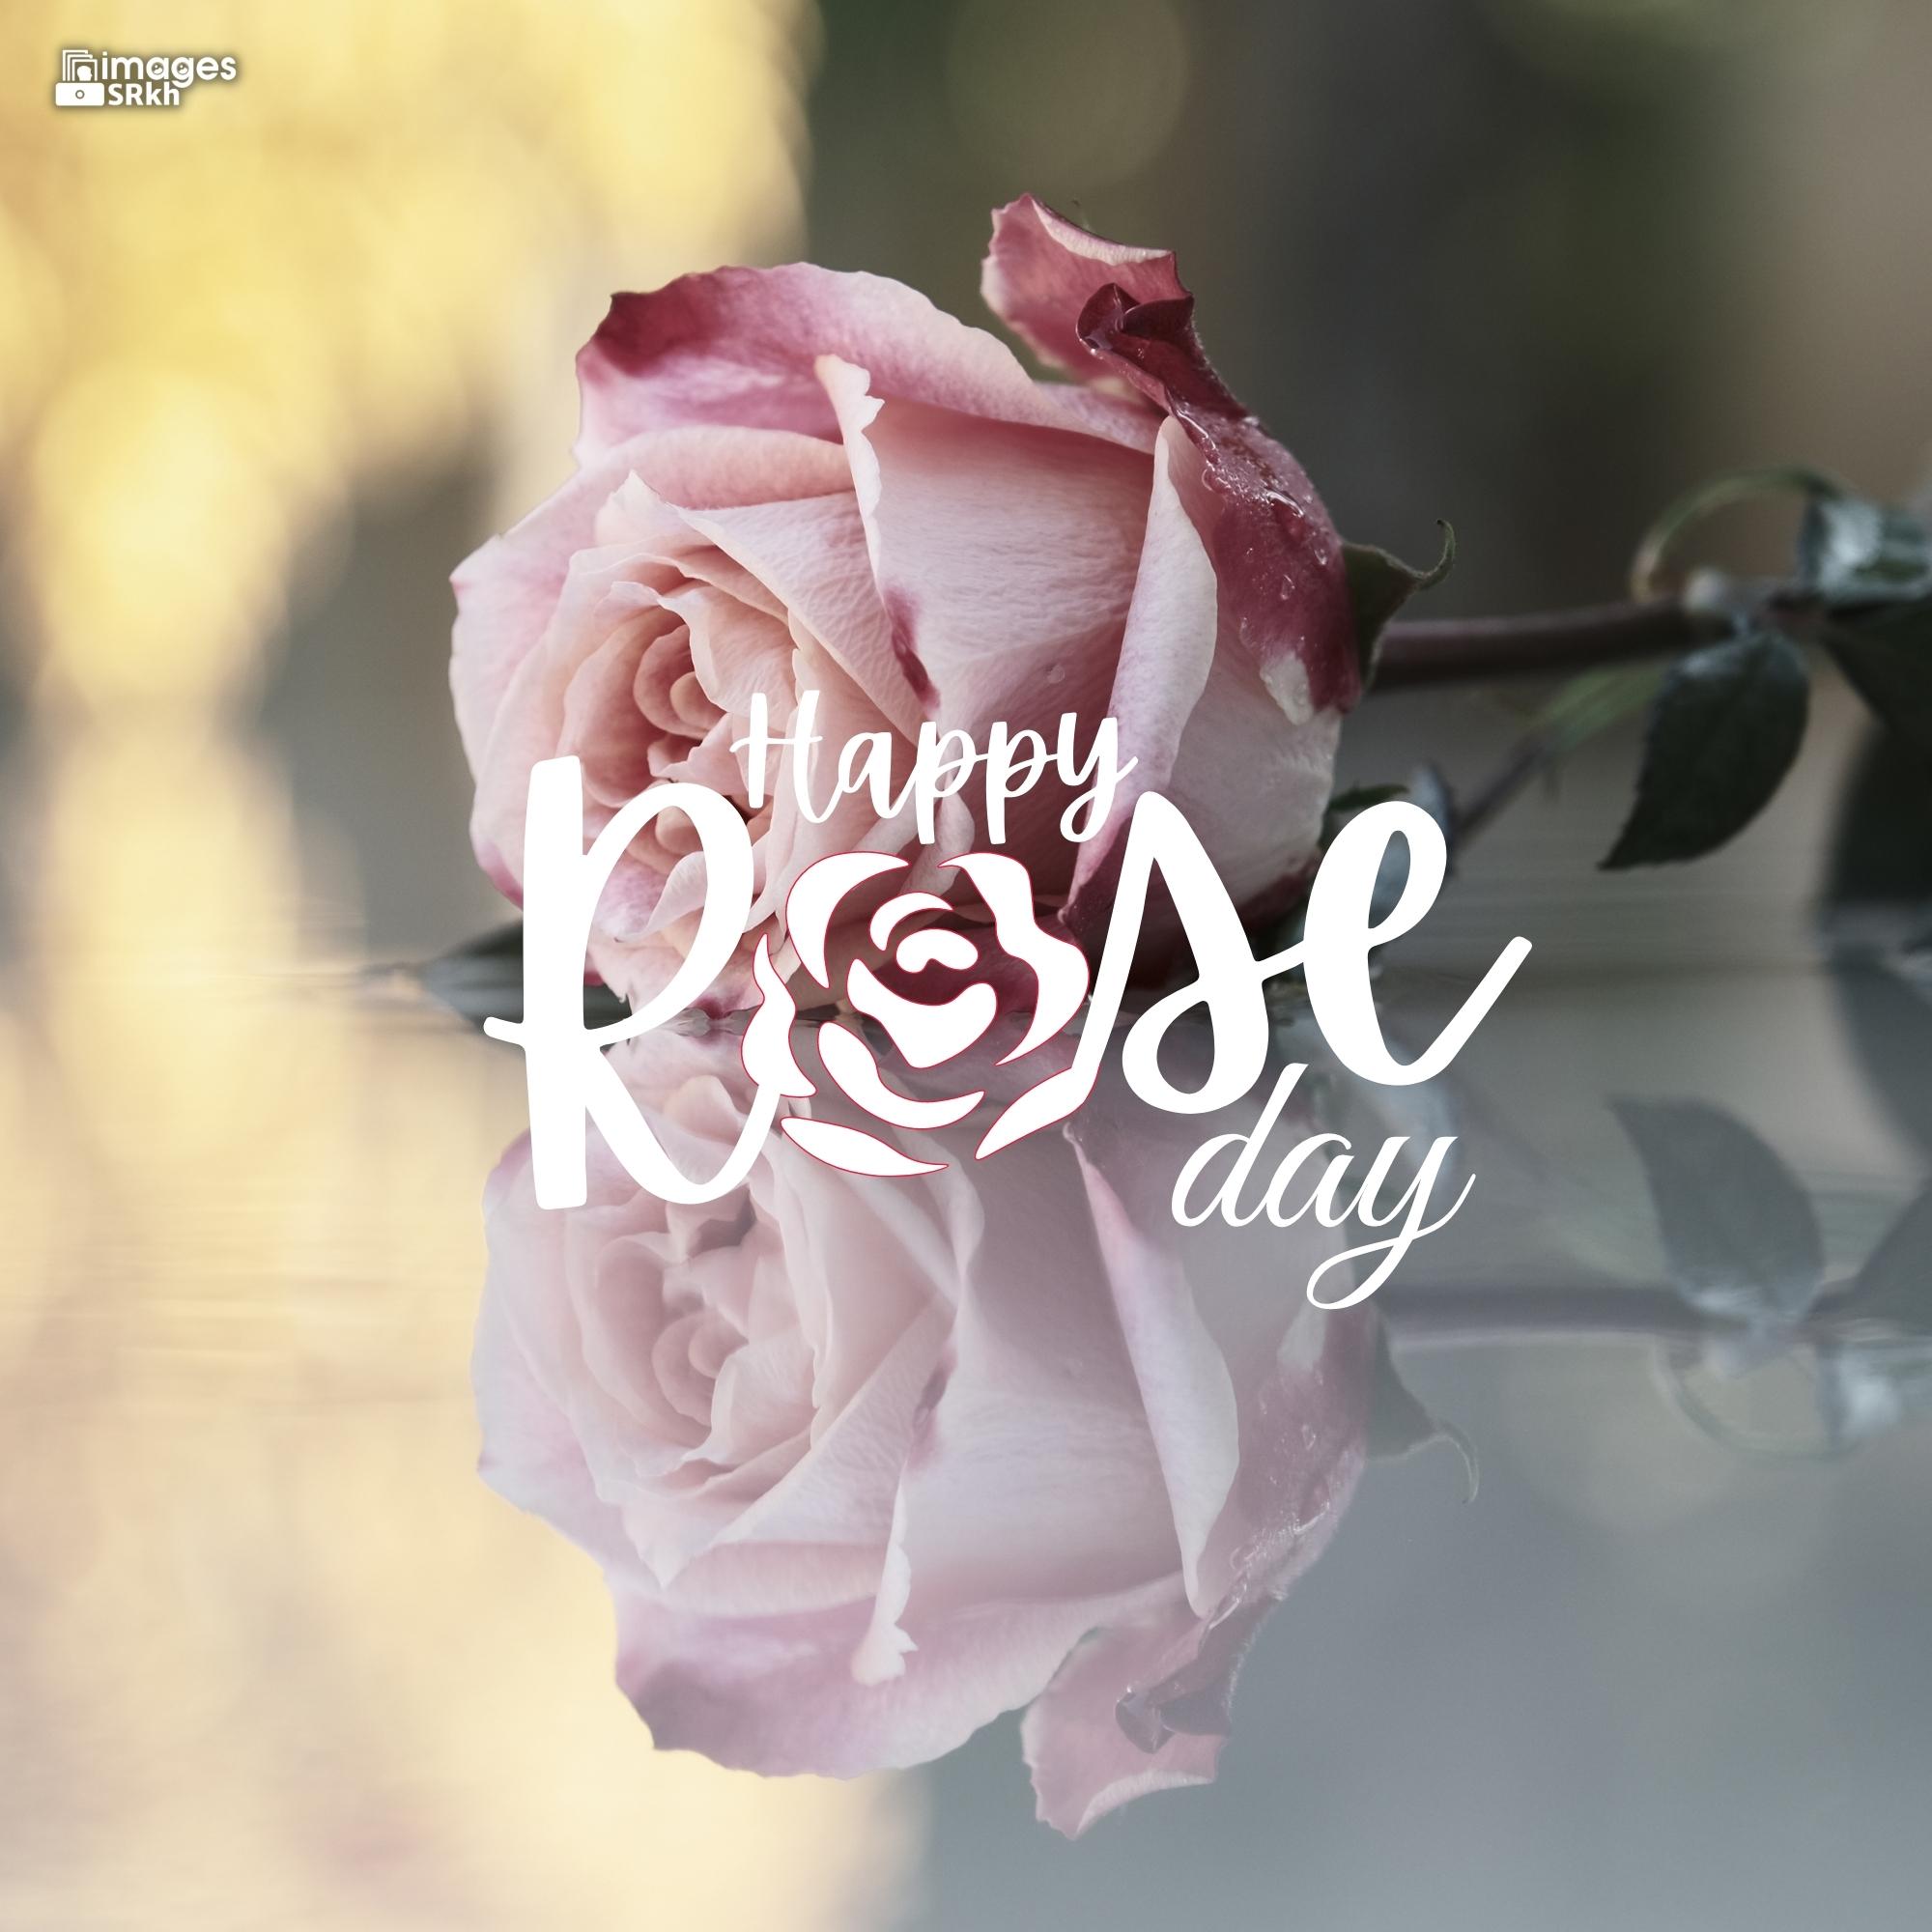 Happy Rose Day Image Hd Download (30)